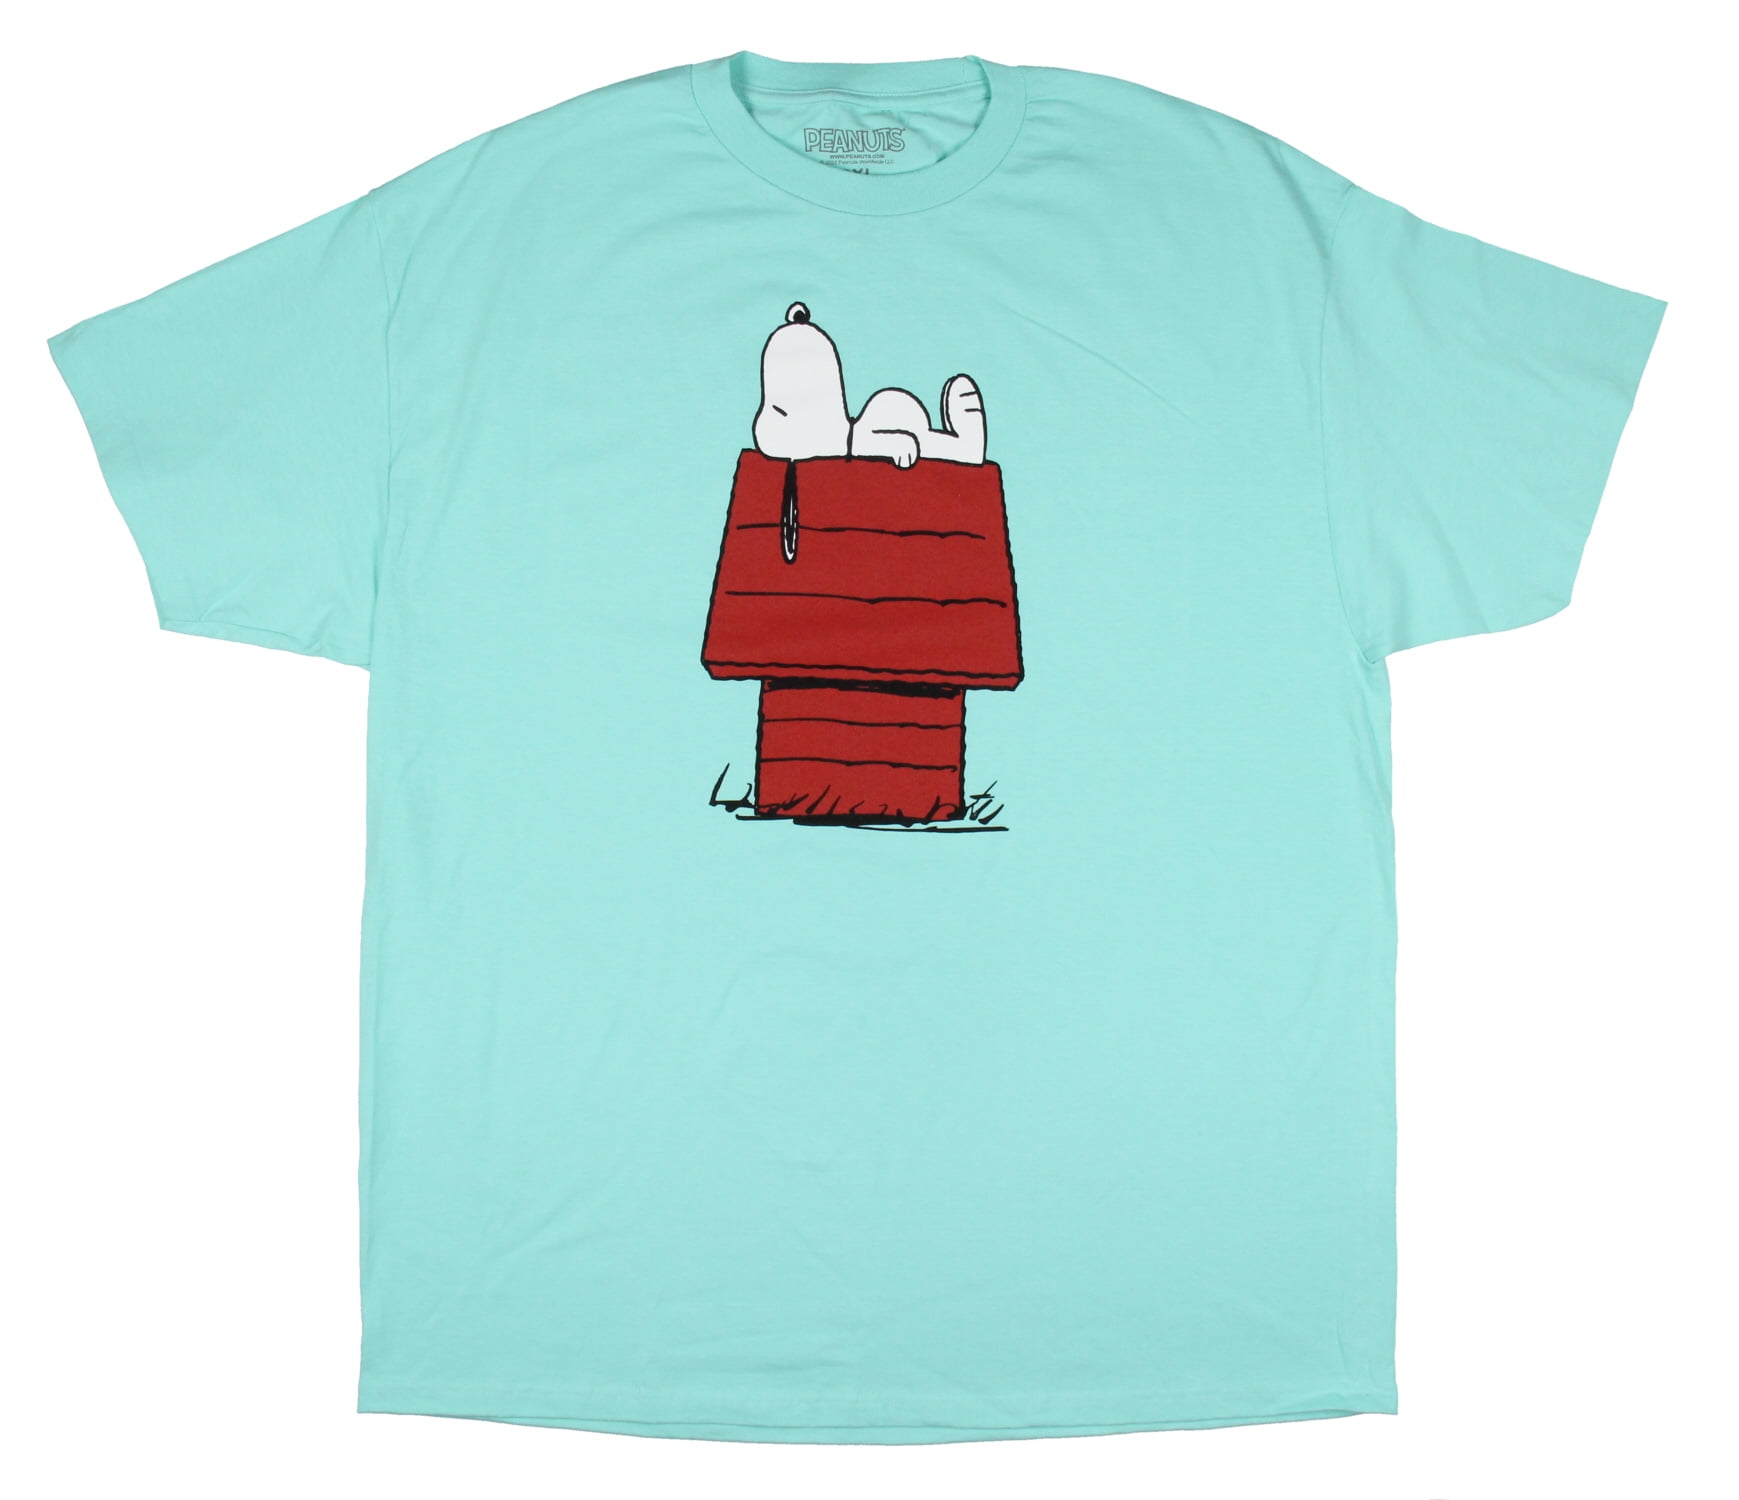 Peanuts Men\'s Snoopy Sleeping on Red Doghouse Graphic T-Shirt (Heather  Grey, Large)